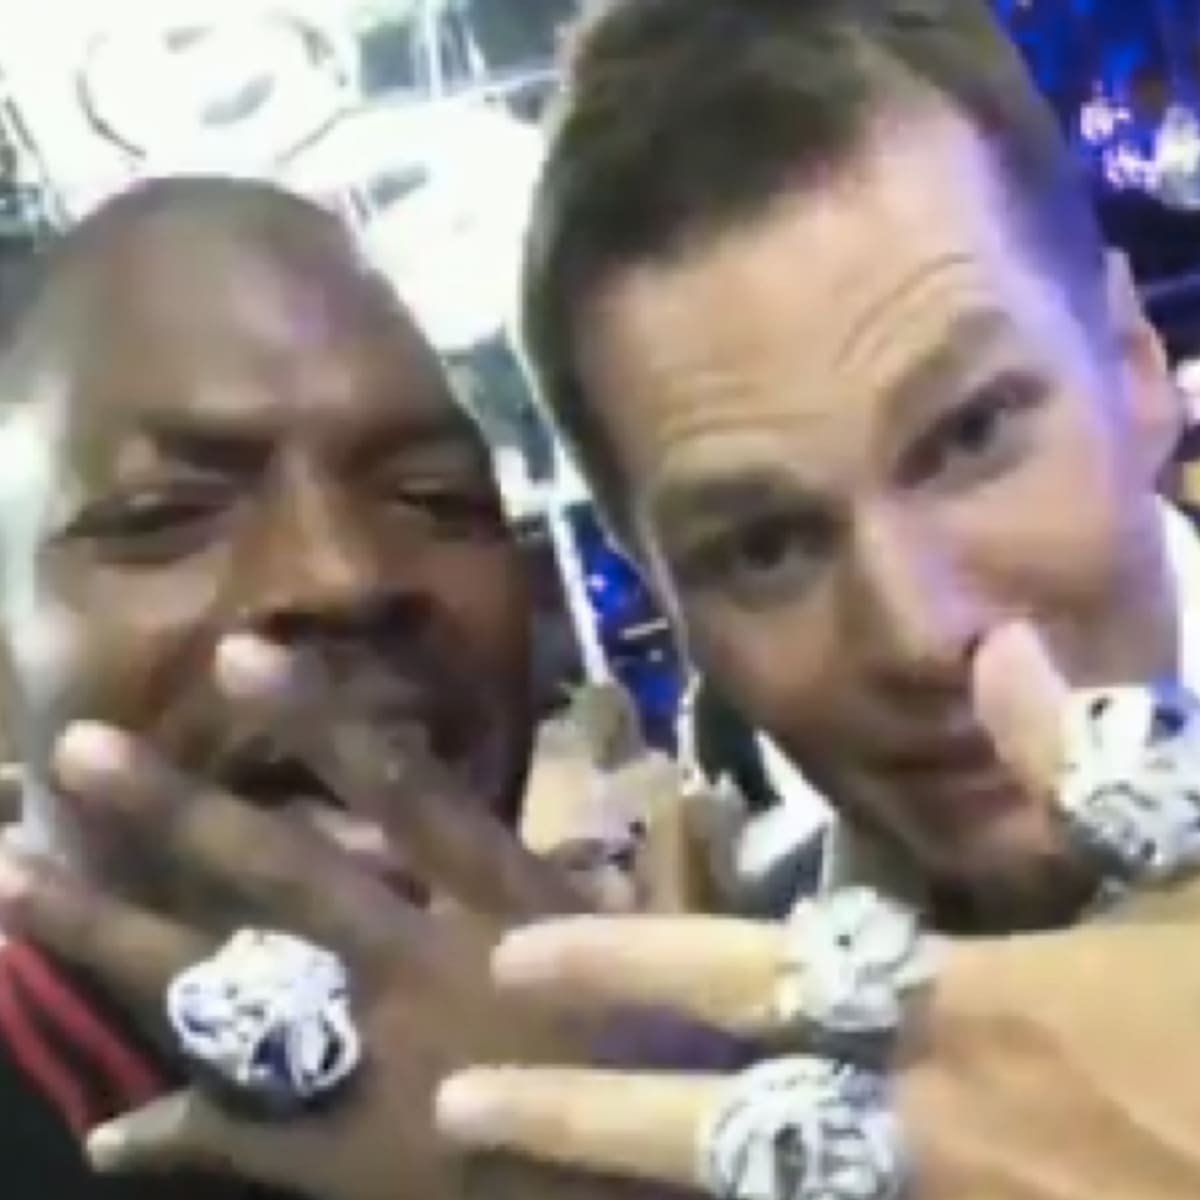 Tom Brady shows off all five Super Bowl rings (video) - Sports